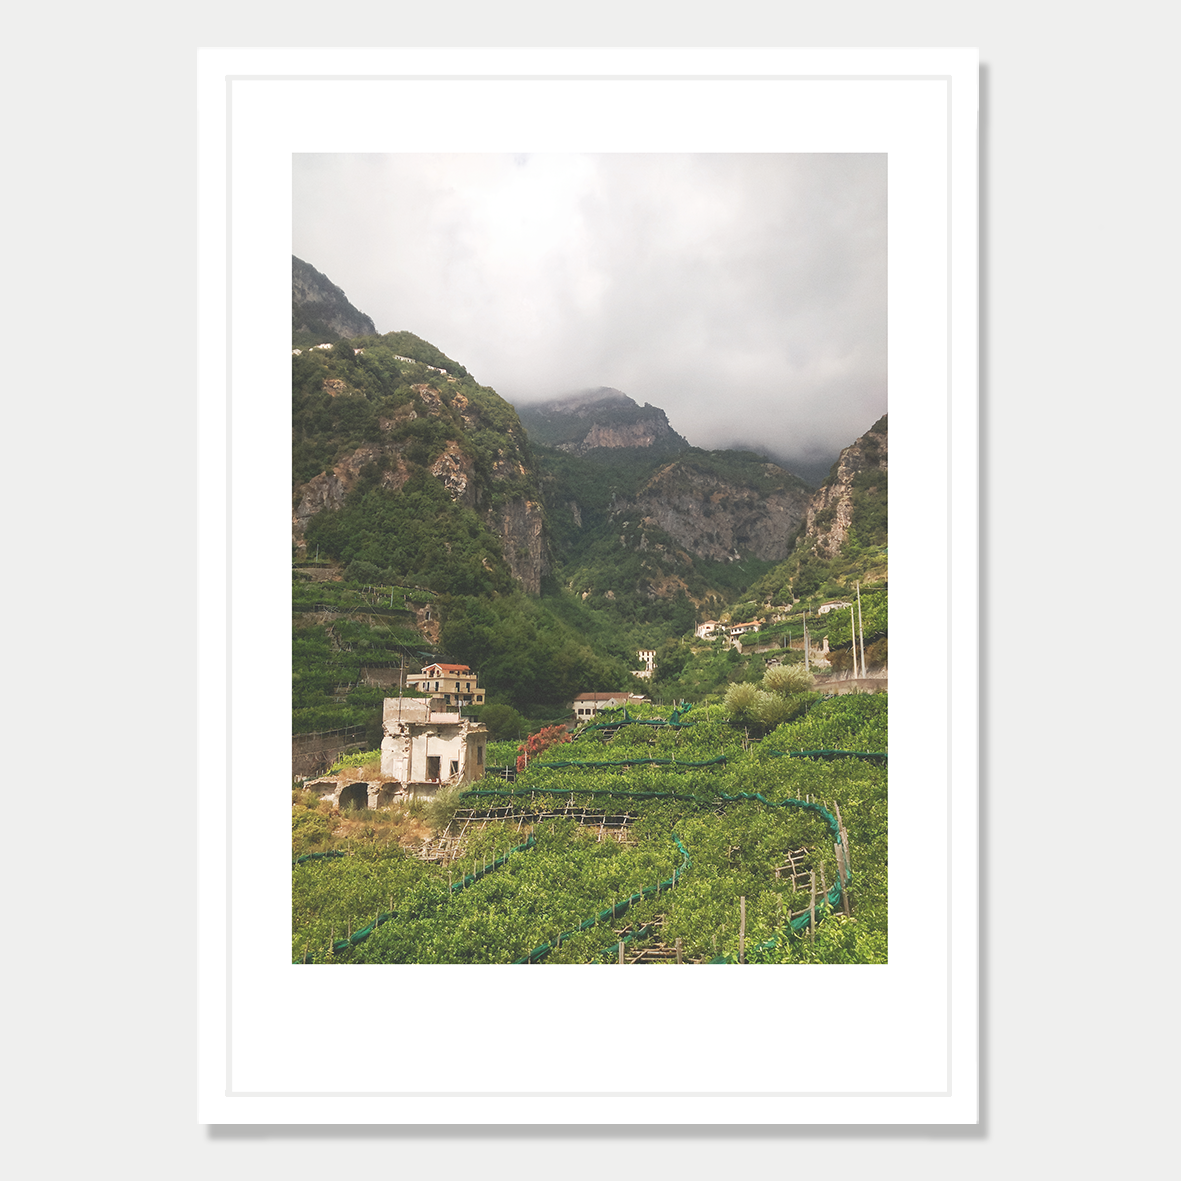 Lemon Grove in a Valley in Amalfi Italy Photographic Art Print in a Skinny White Frame